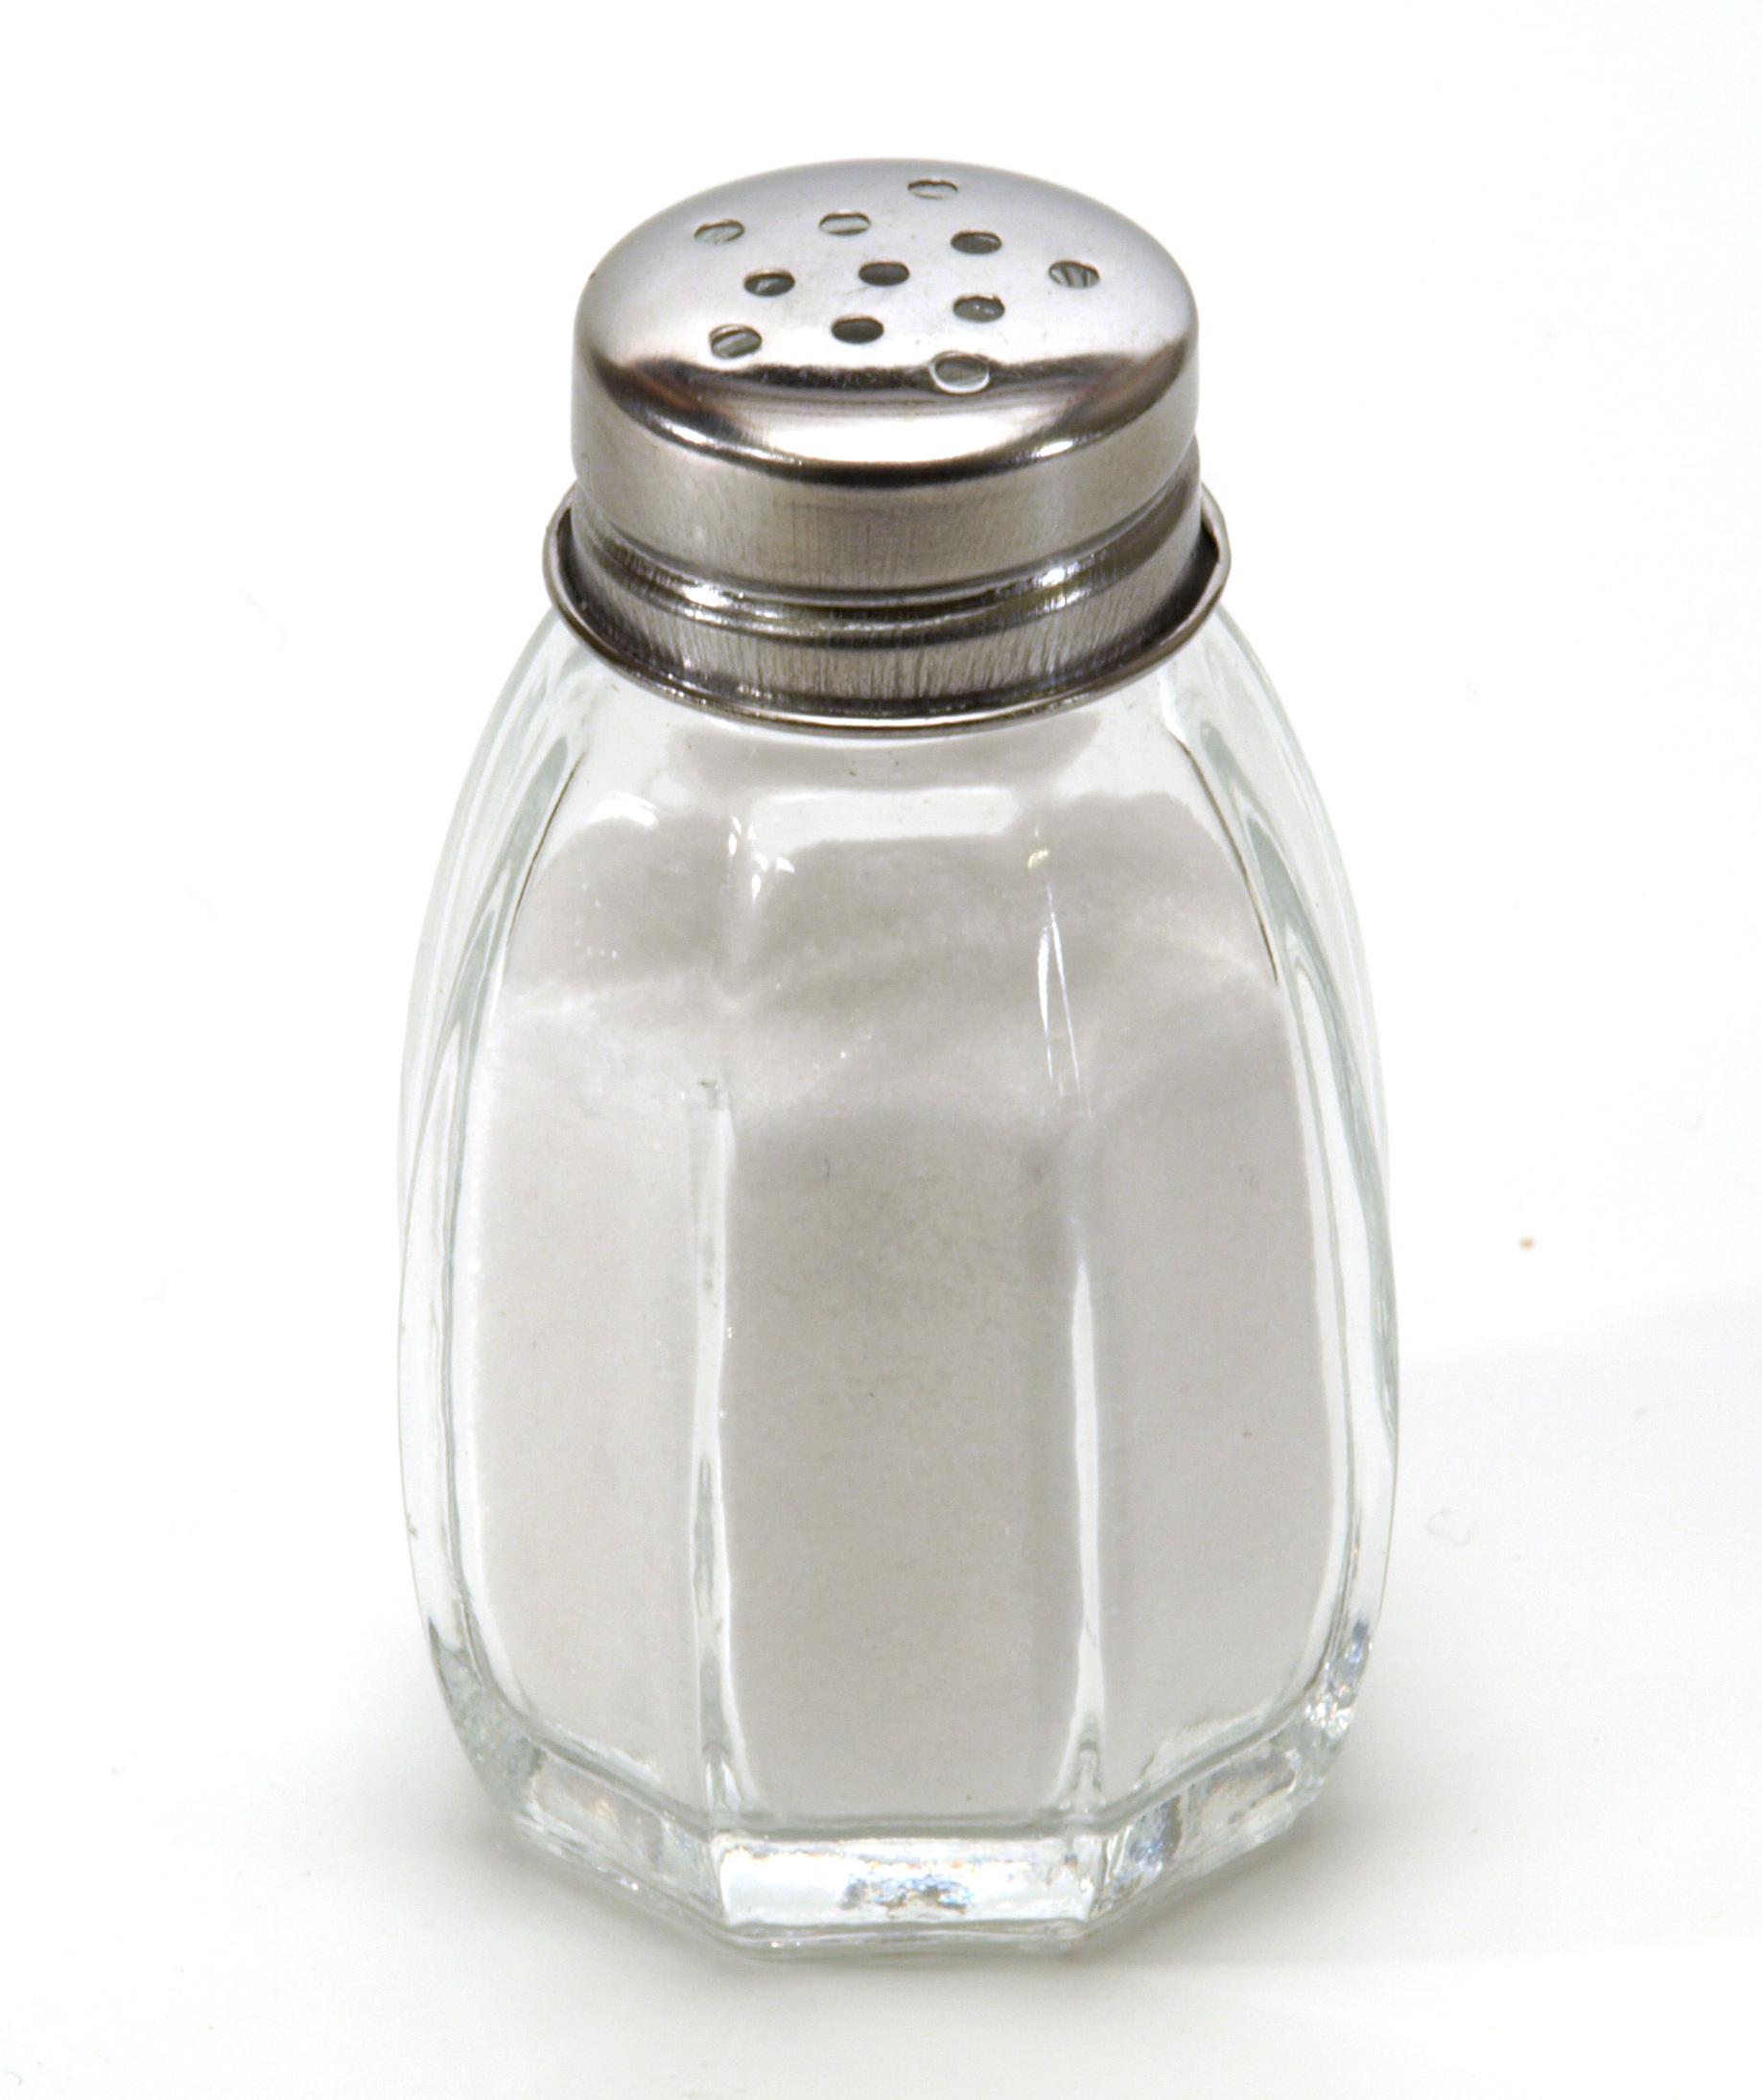 a glass salt shaker with a metal top photographed on a white background.